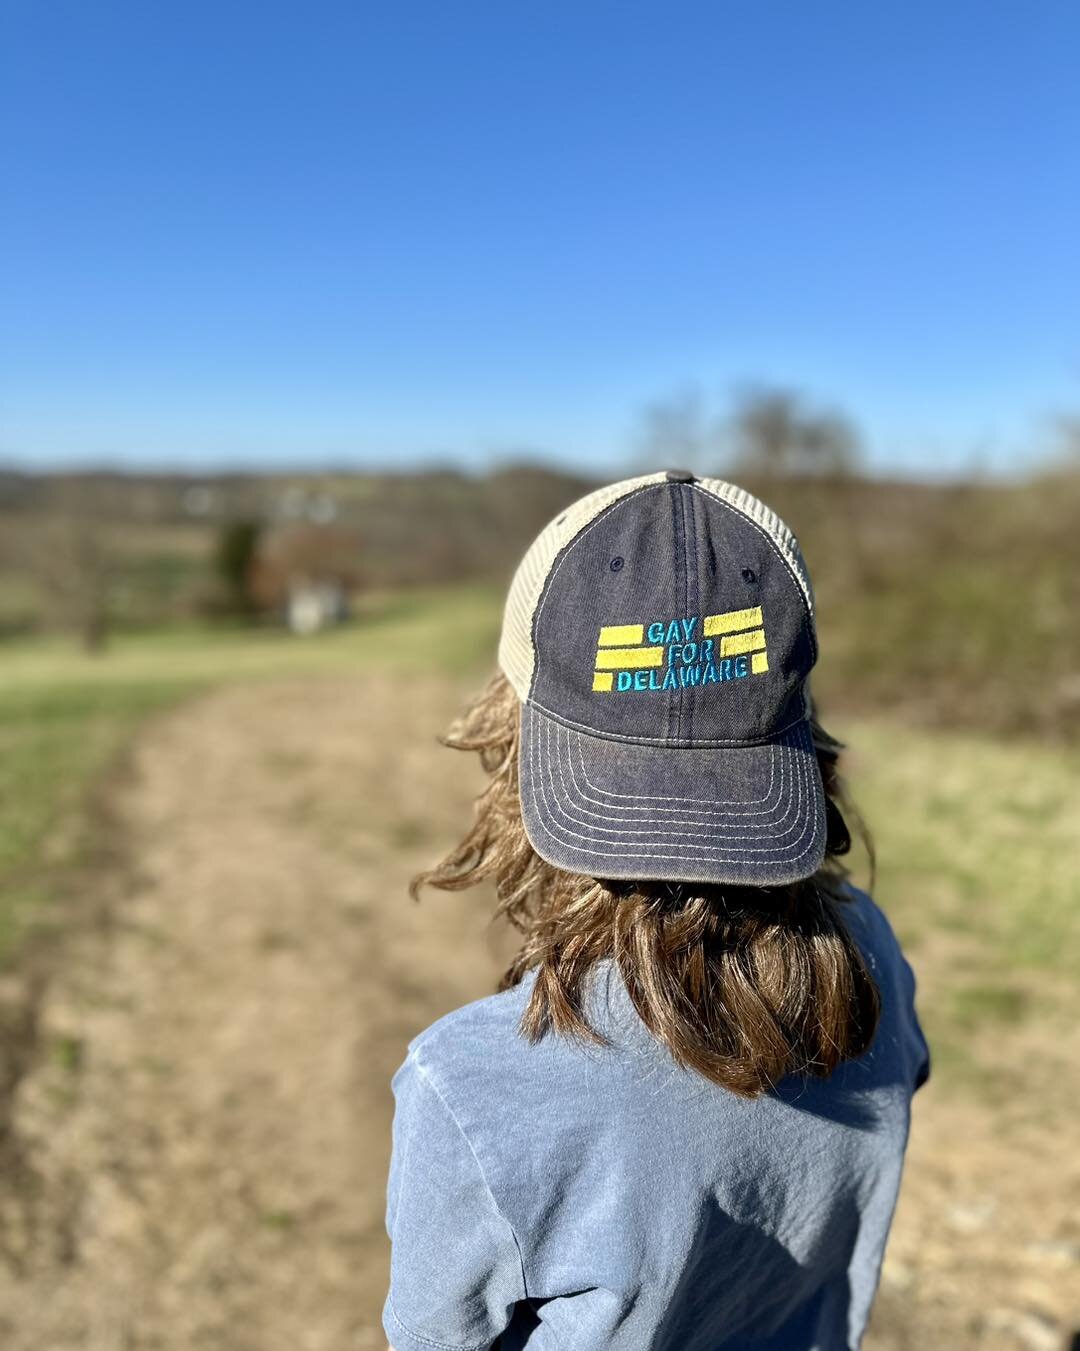 It&rsquo;s a gorgeous day to #optoutside with your Gay for Delaware swag! ☀️

Looking for something new for spring? Check out: https://www.kylefordelaware.com/store